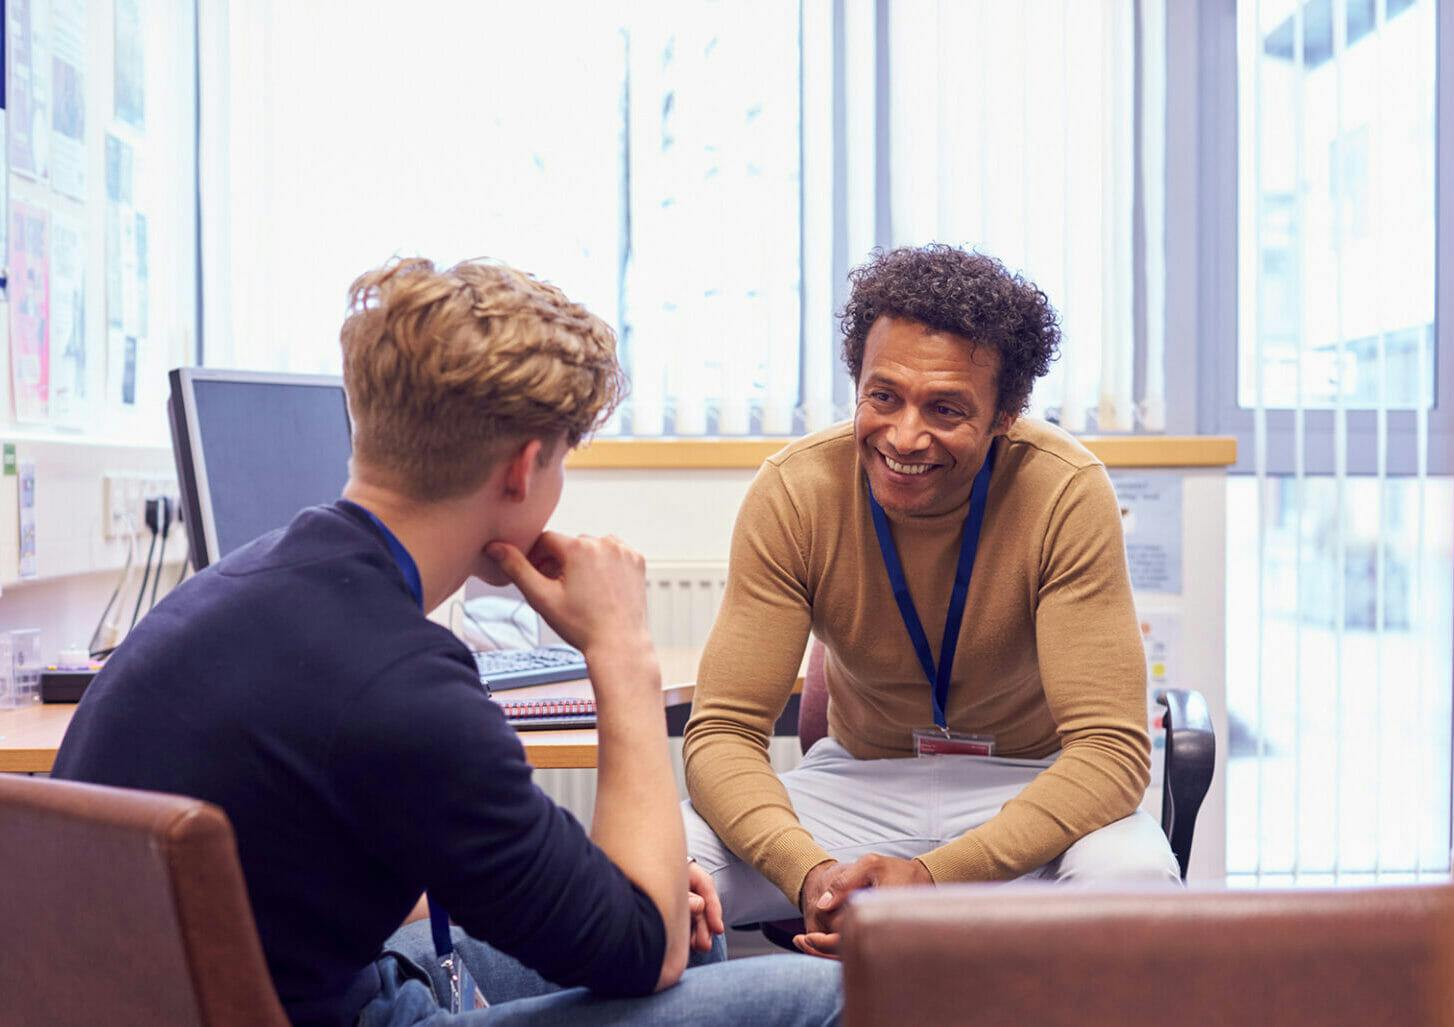 A young person with light skin and short blond hair sits in an office, in conversation with a smiling counselor with brown skin and curly brown hair.